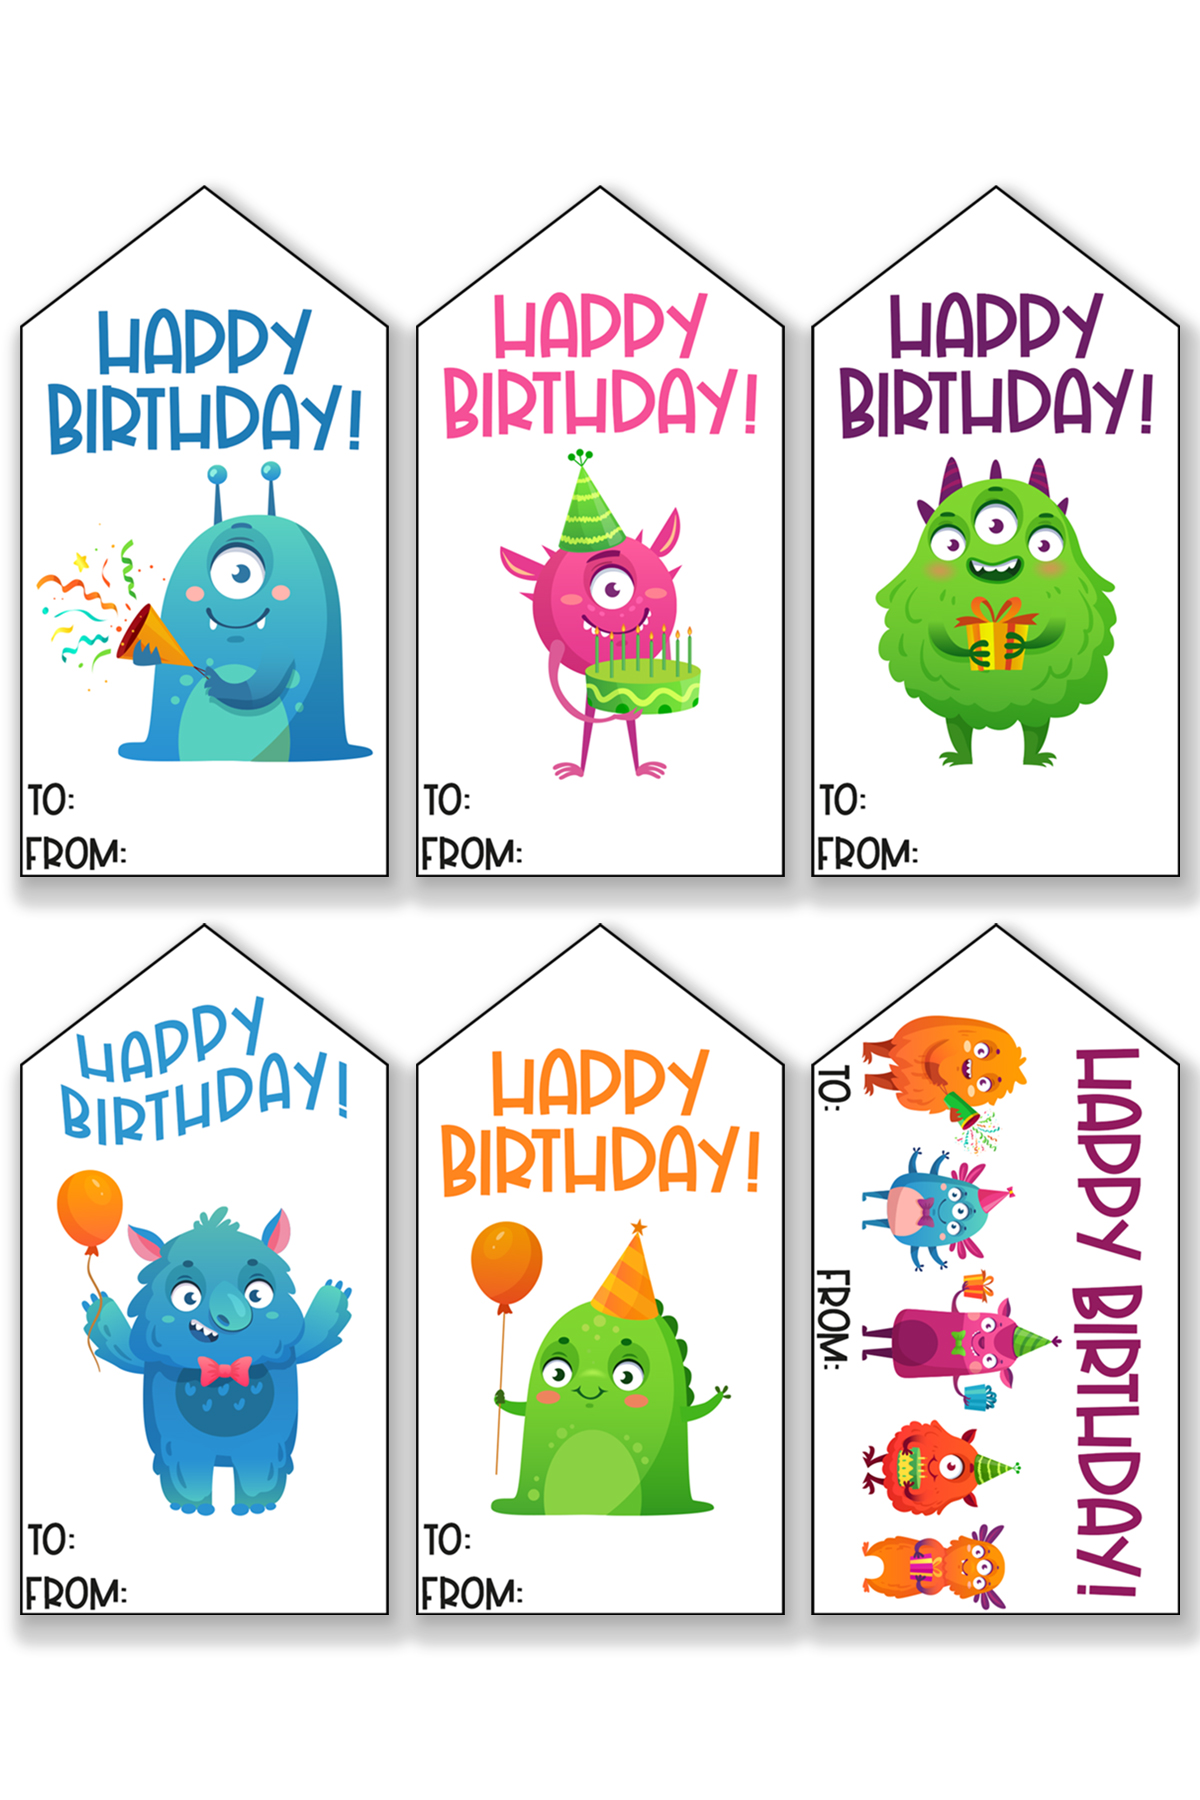 This image is showing one of the free printable birthday tags set - each tag has a different monster on its tag.